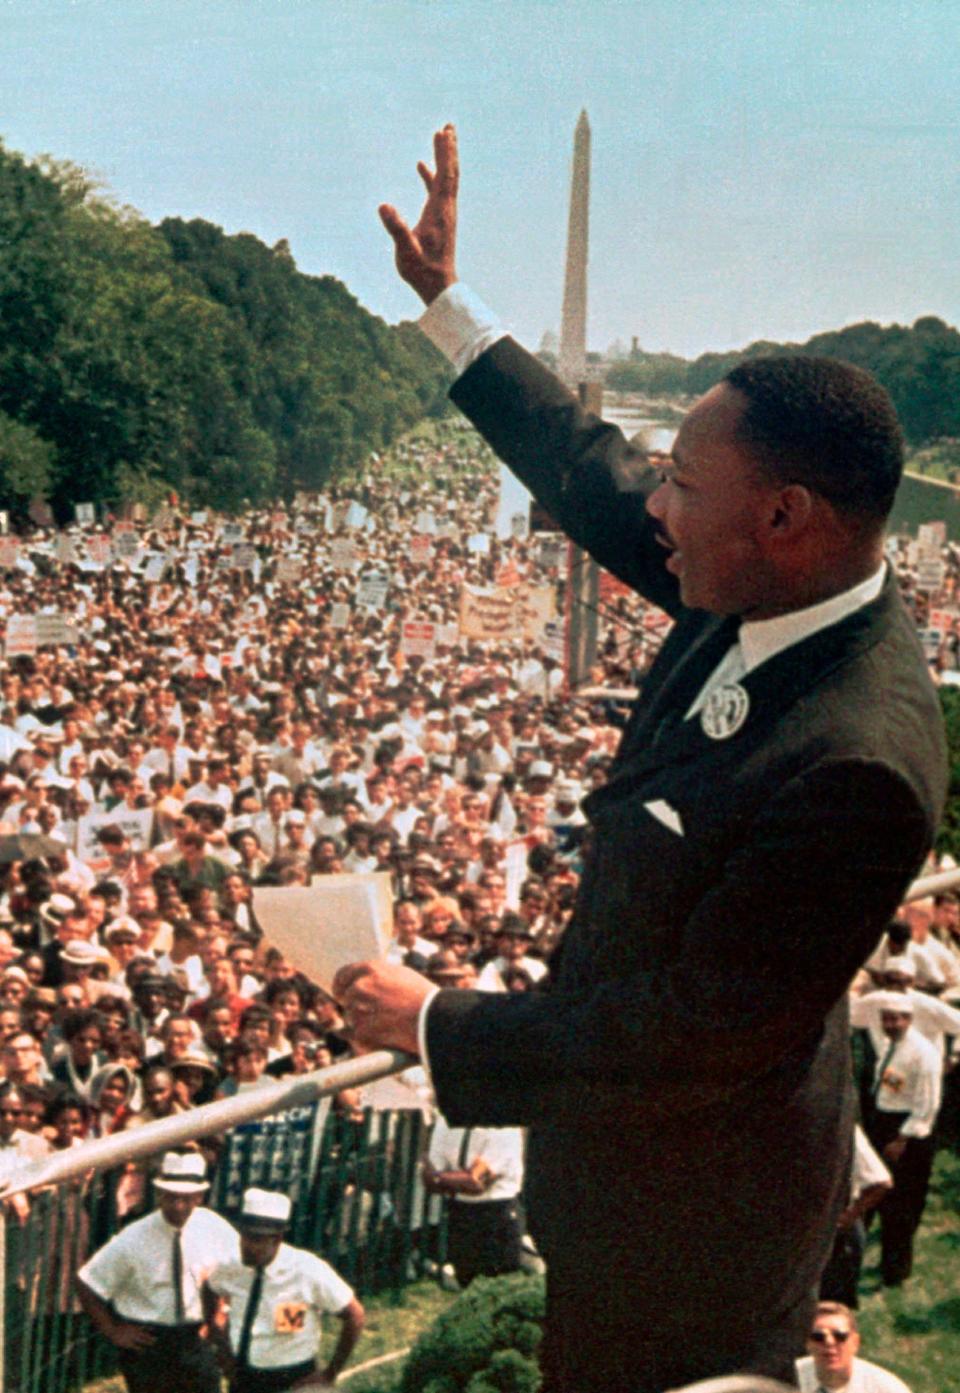 Martin Luther King, Jr., greets people during the March on Washington.